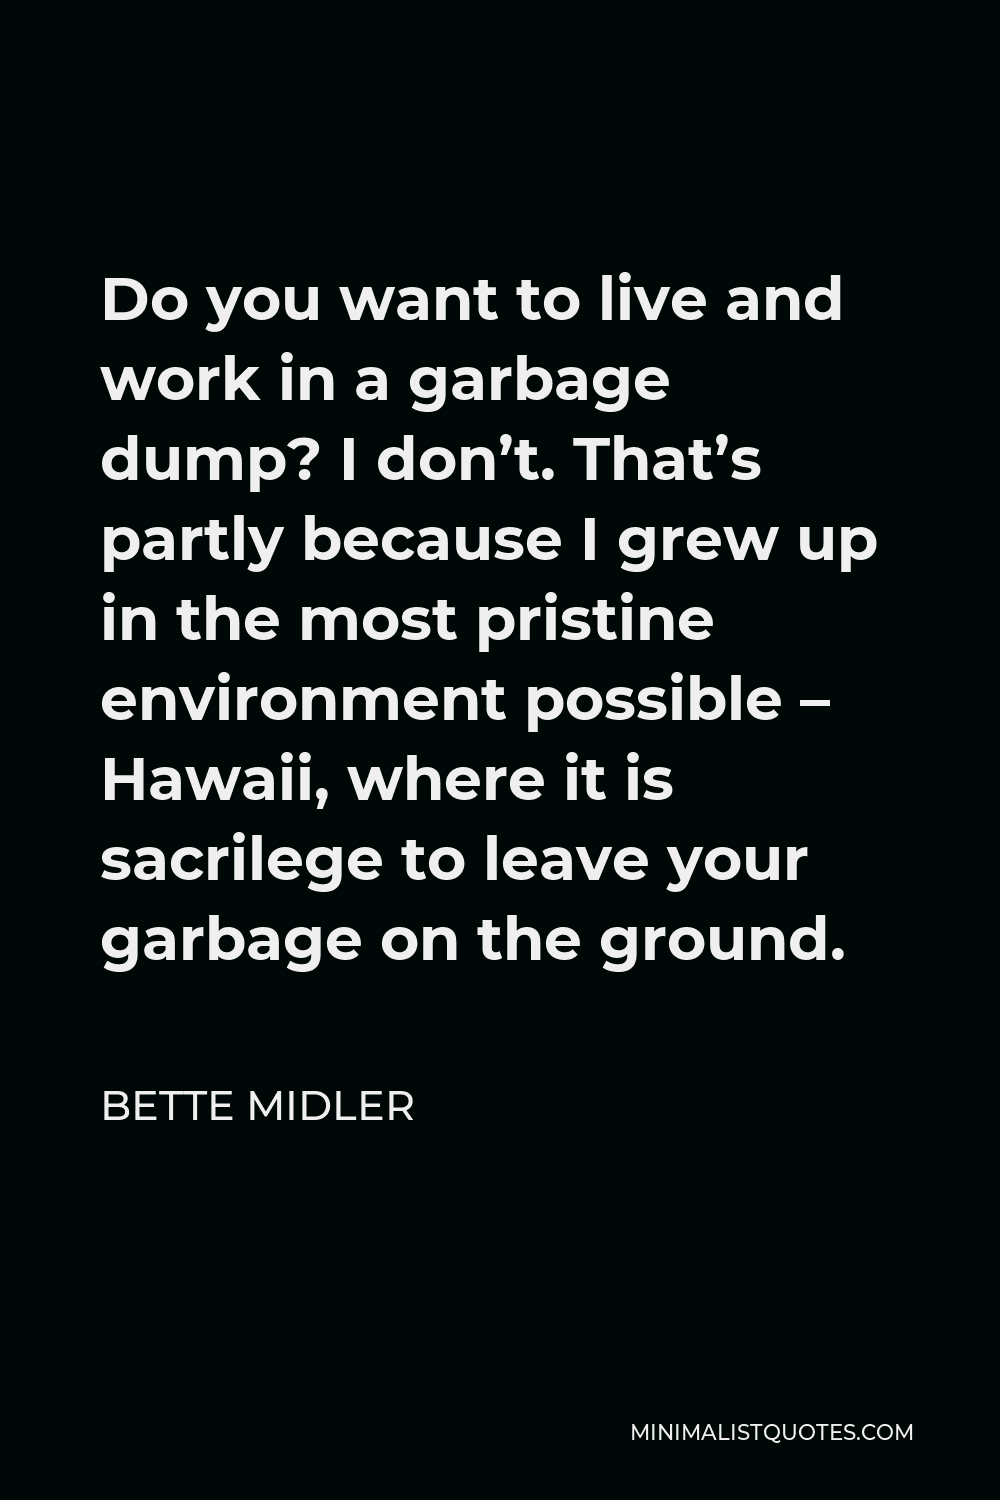 Bette Midler Quote - Do you want to live and work in a garbage dump? I don’t. That’s partly because I grew up in the most pristine environment possible – Hawaii, where it is sacrilege to leave your garbage on the ground.